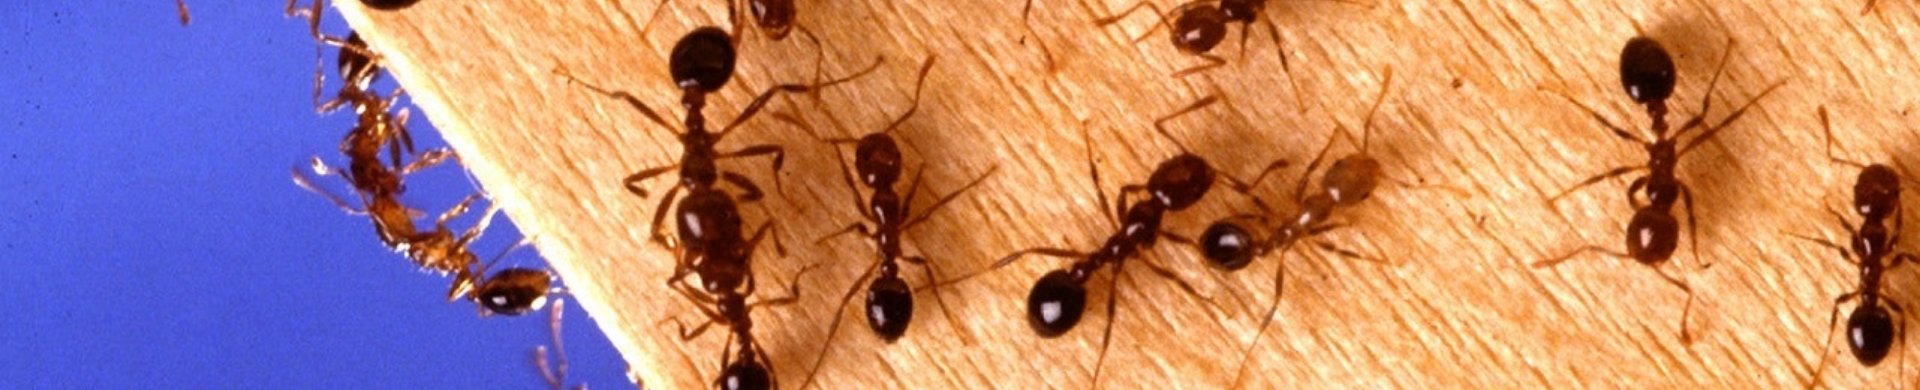 How to Get Rid of Your House Ants Naturally